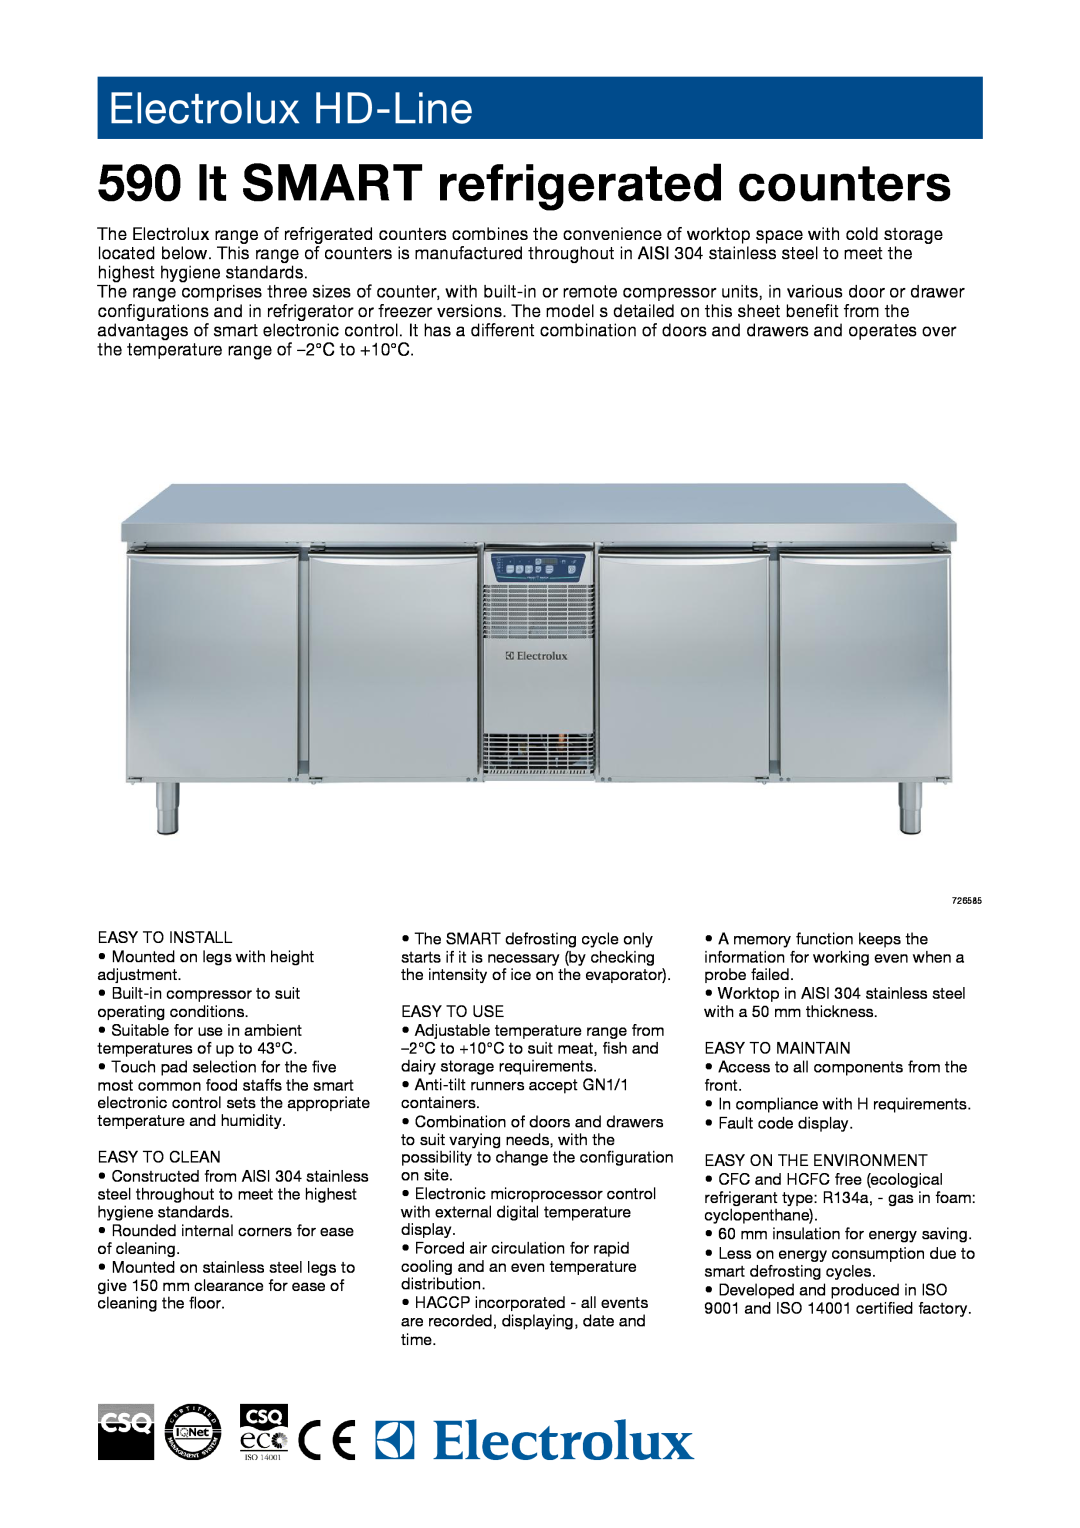 Electrolux RCER4M4, 726585 manual lt SMART refrigerated counters, Electrolux HD-Line 